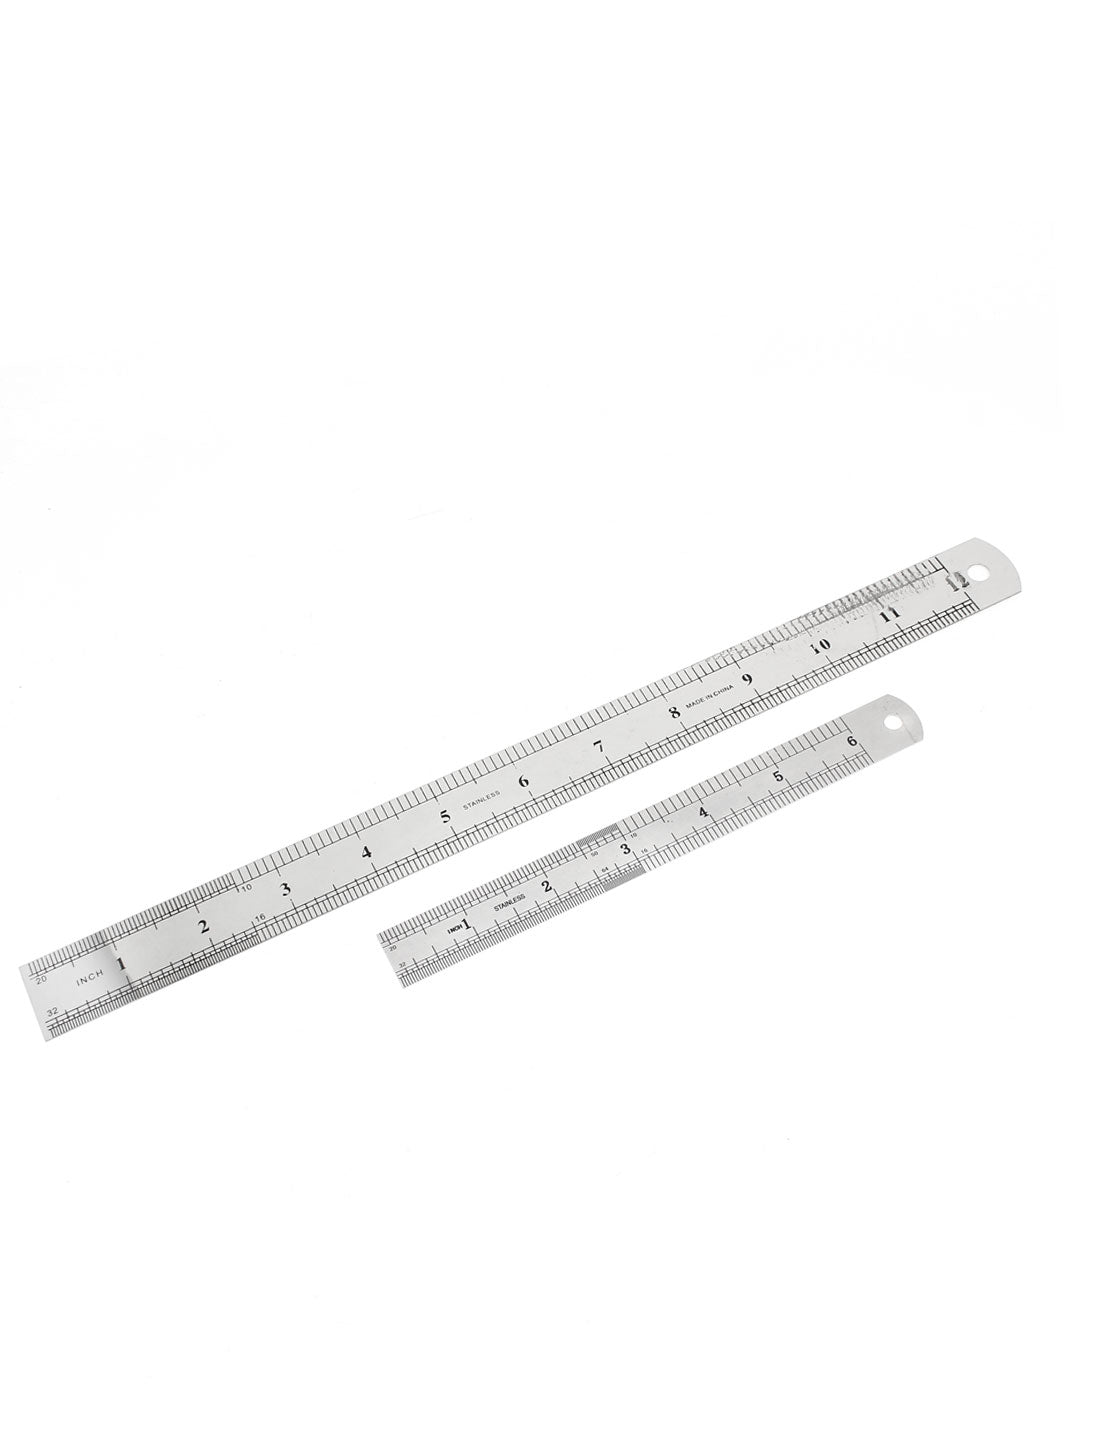 uxcell Uxcell 2 in 1 15cm 30cm Measure Range Double Side   Office Metric Scale Straight Ruler Silver Tone